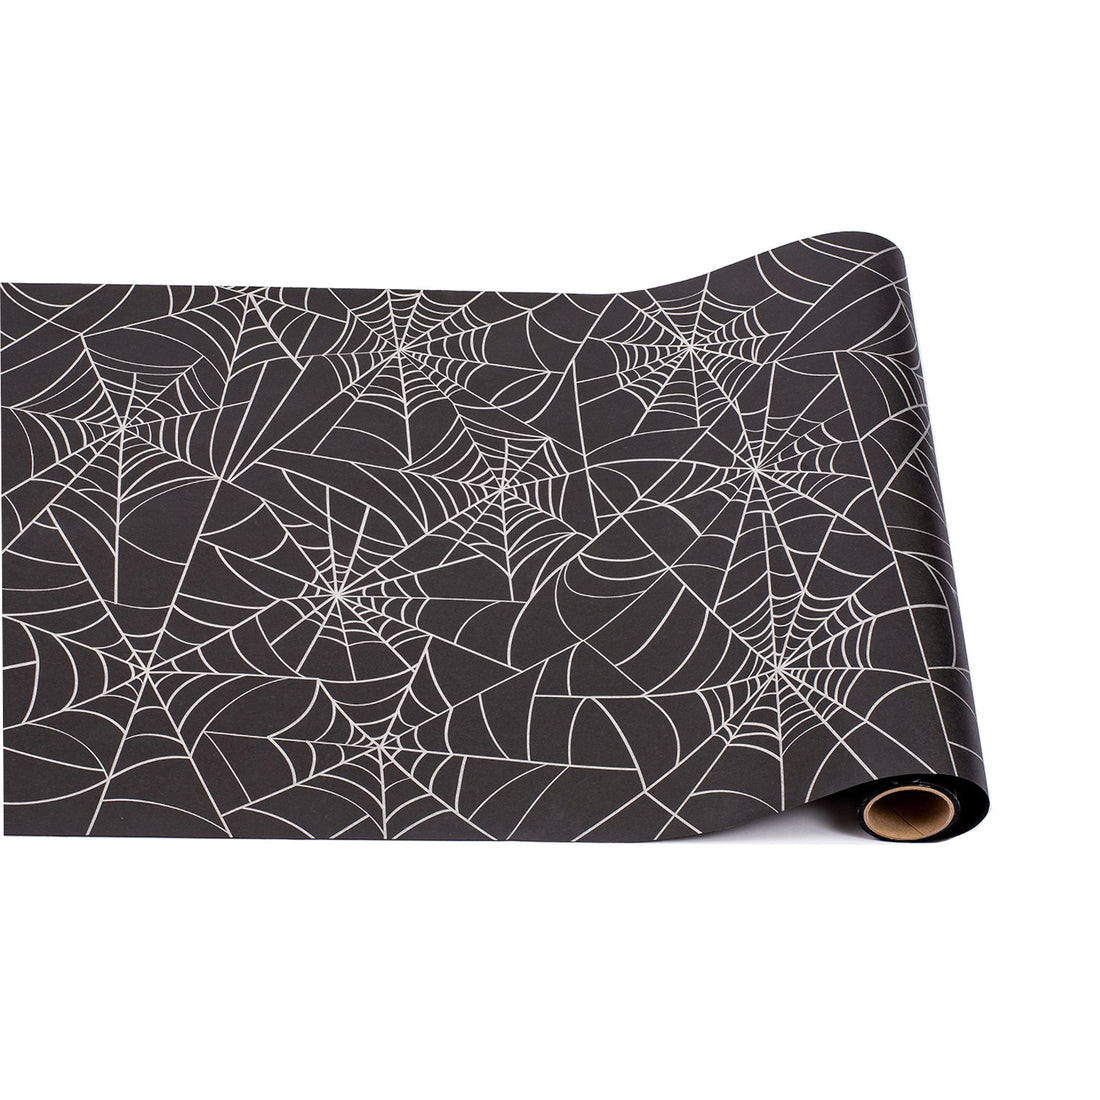 A paper runner roll of black paper covered with a repeating pattern of interconnected silver spider webs.